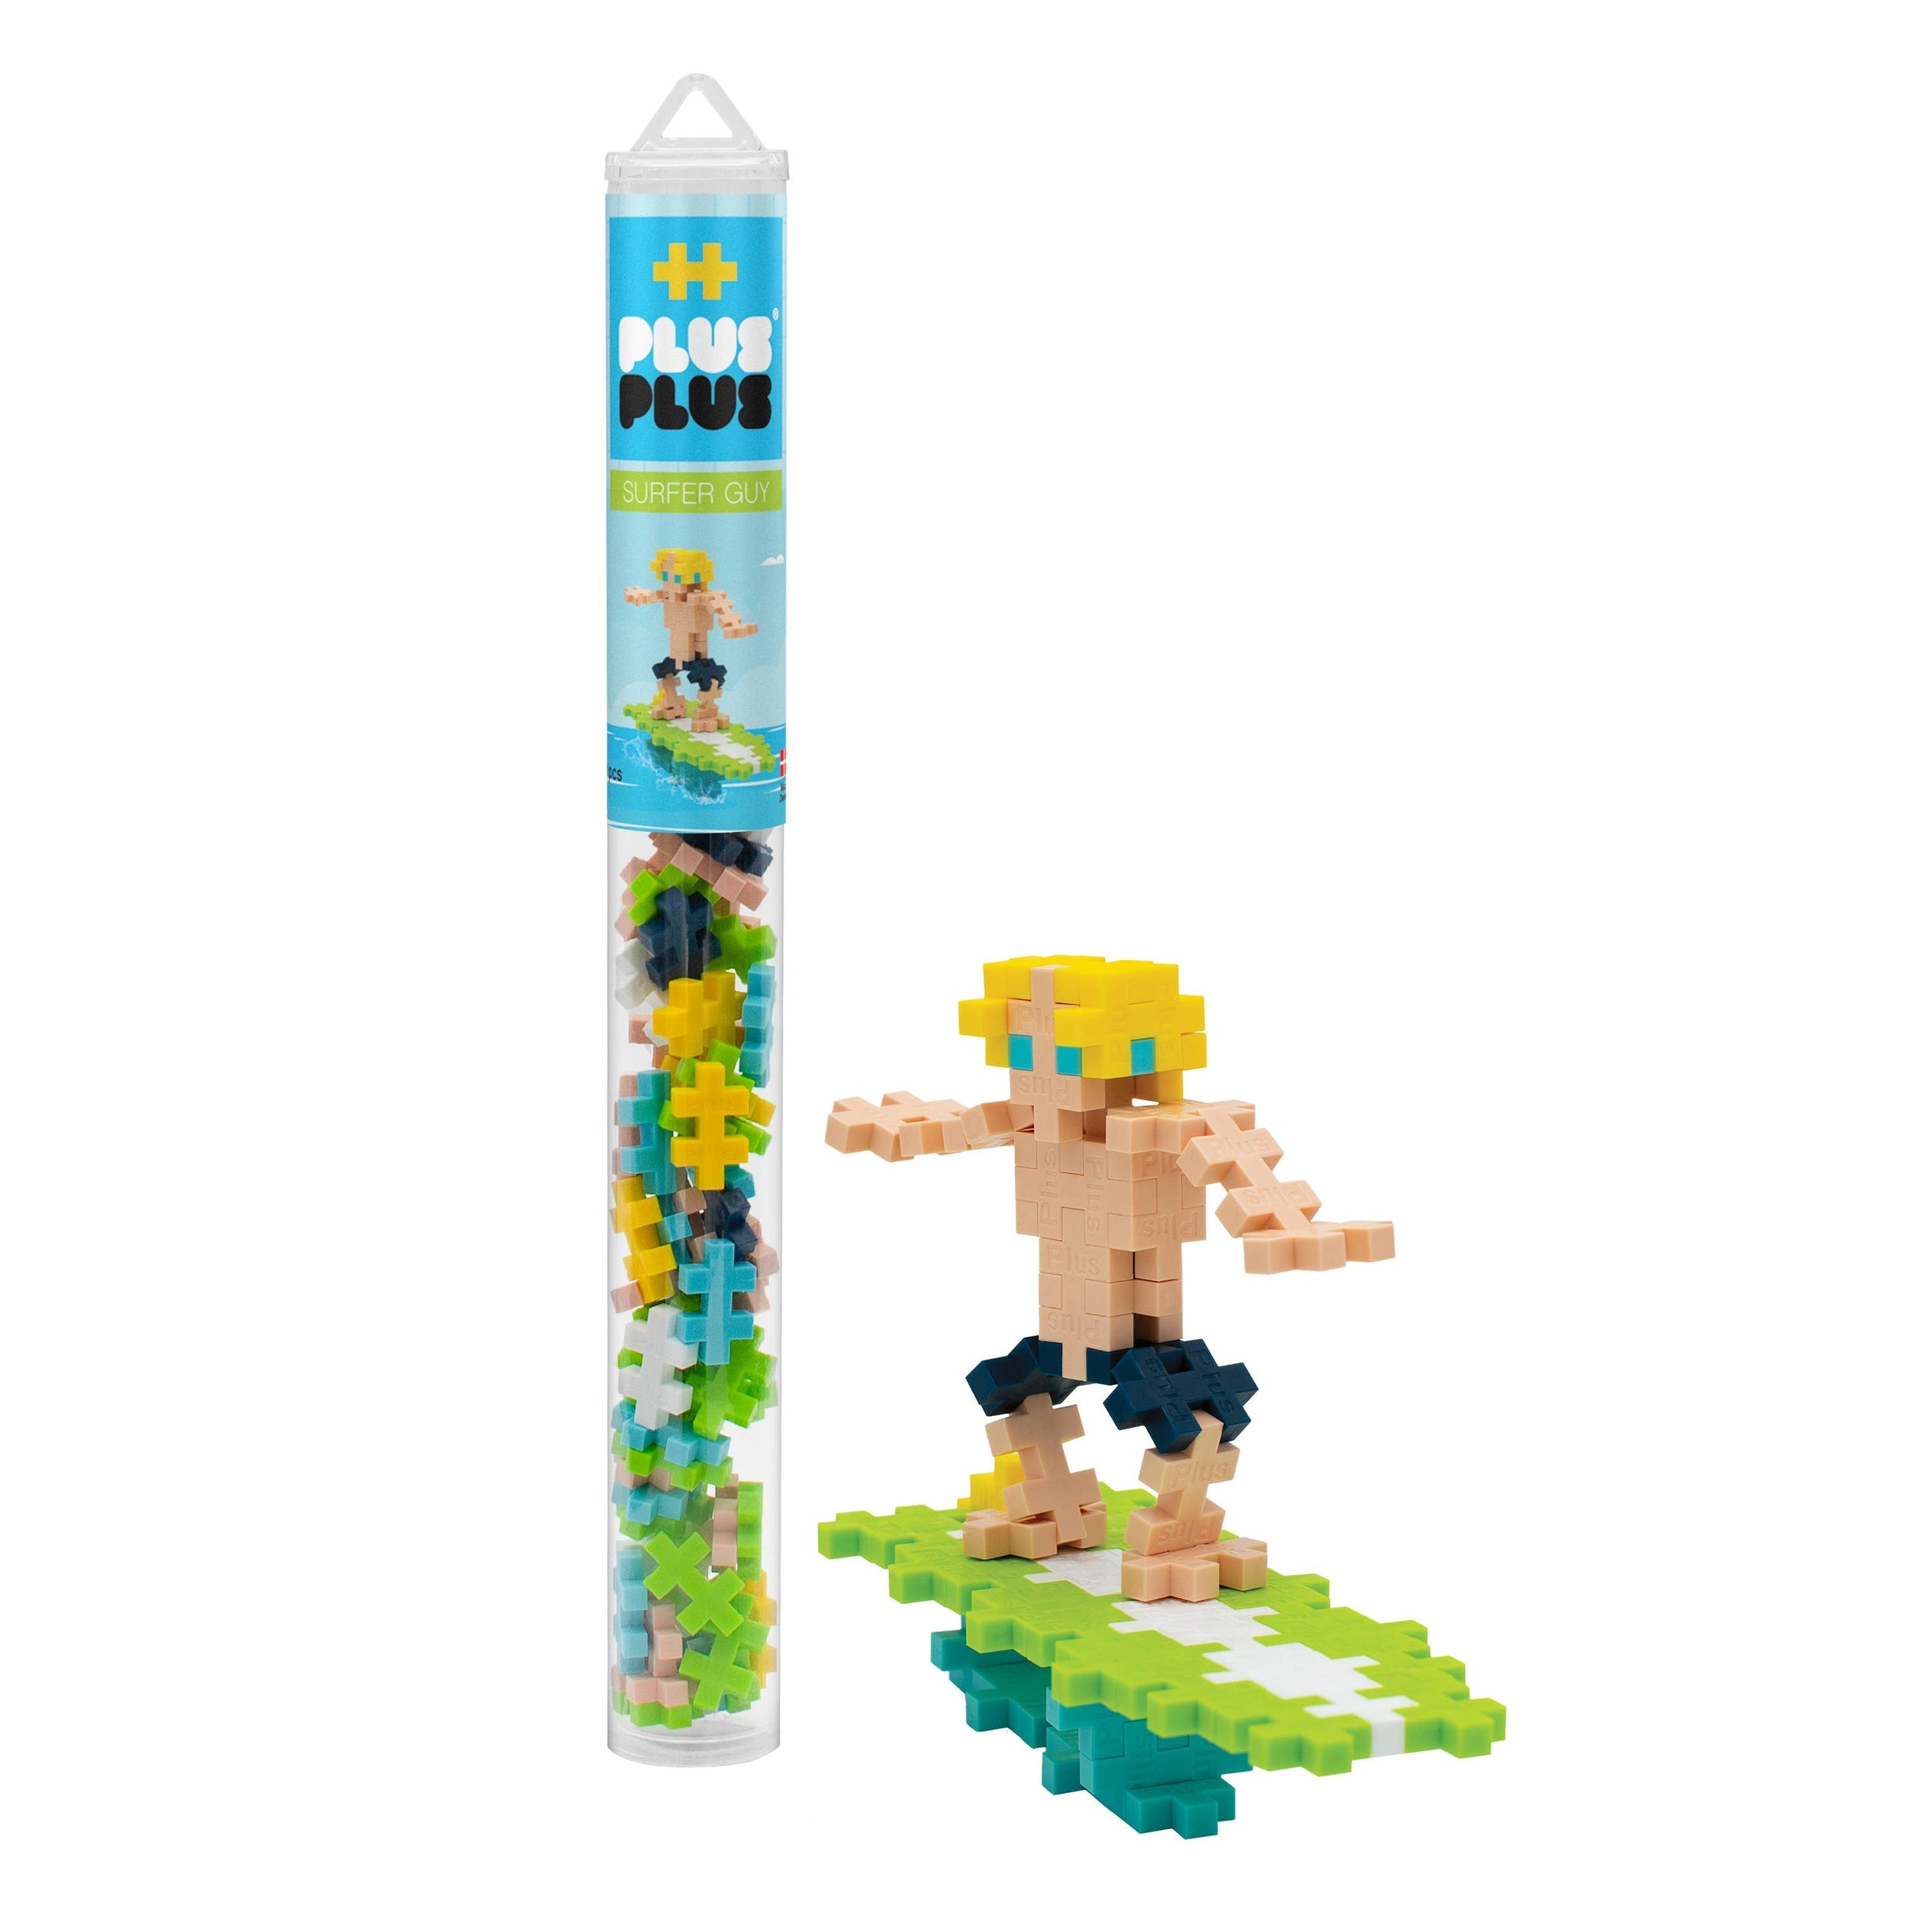 surfer construction toy